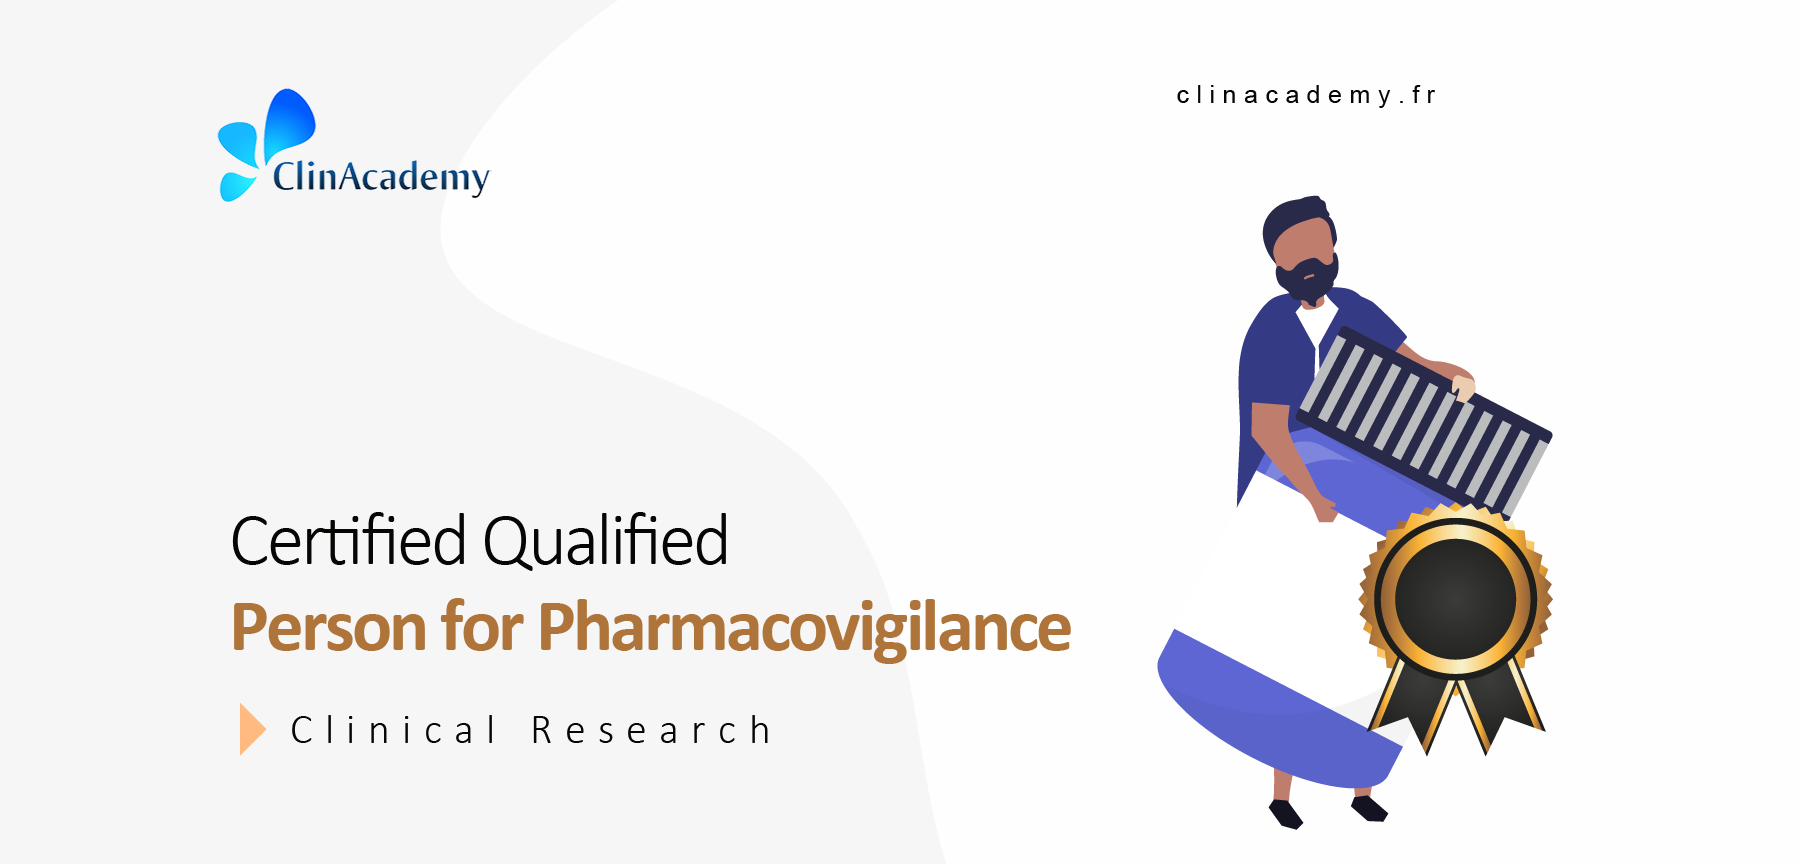 Certified Qualified Person for Pharmacovigilance